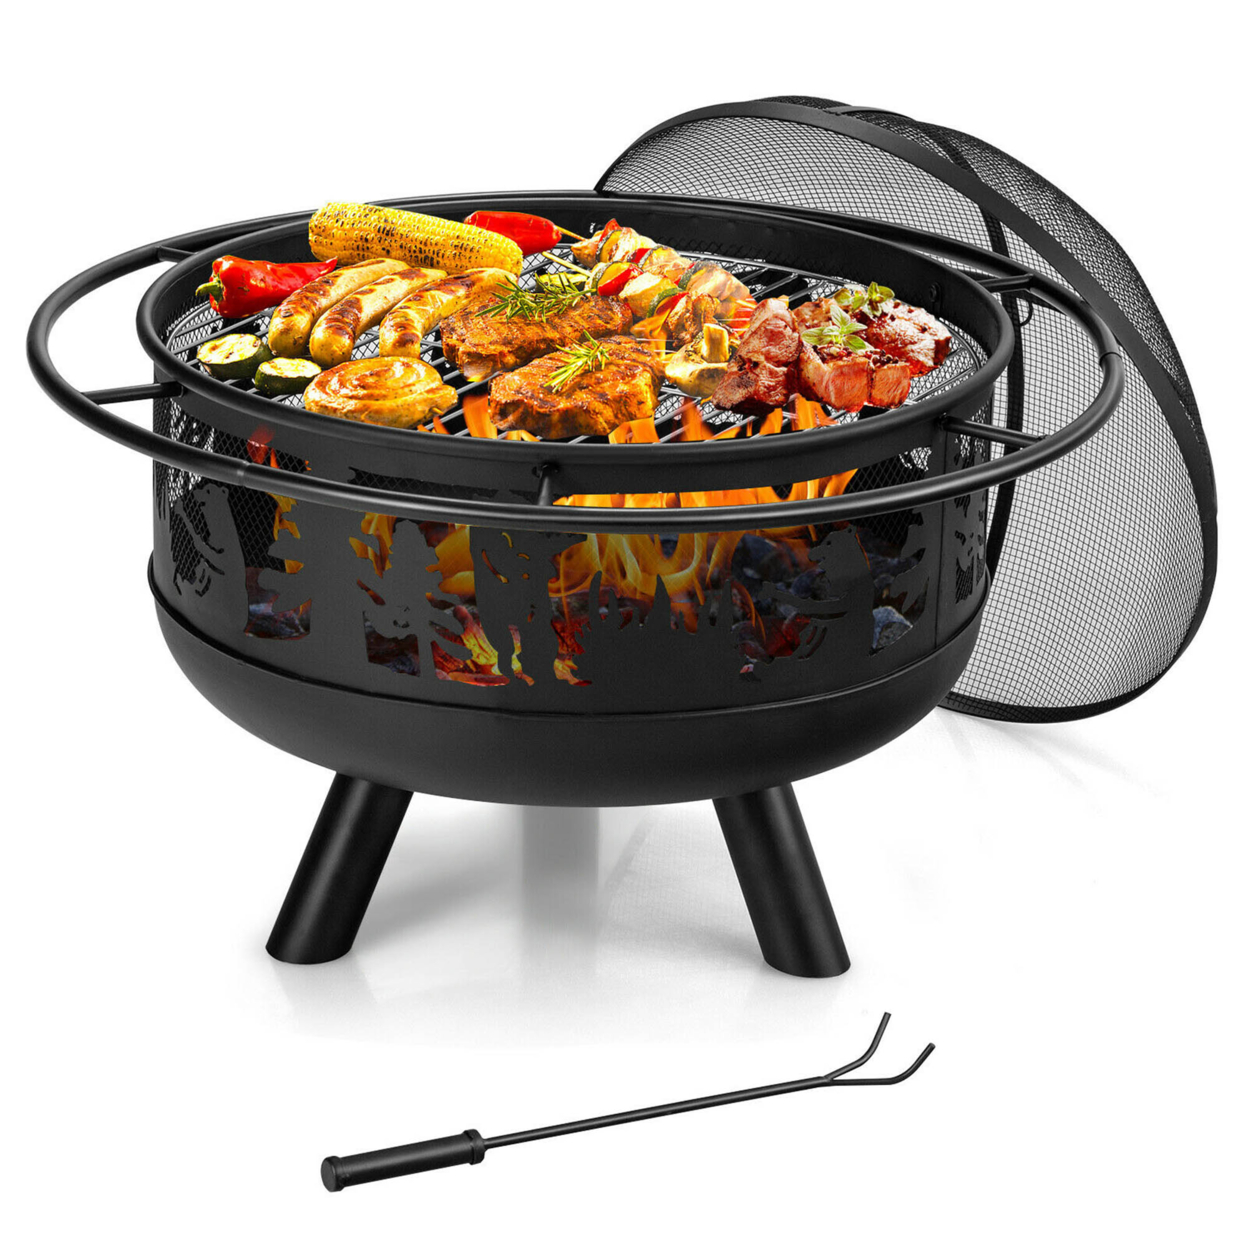 30'' Patio Round Fire Pit W/ Fire Poker Cooking Grill For Camping BBQ